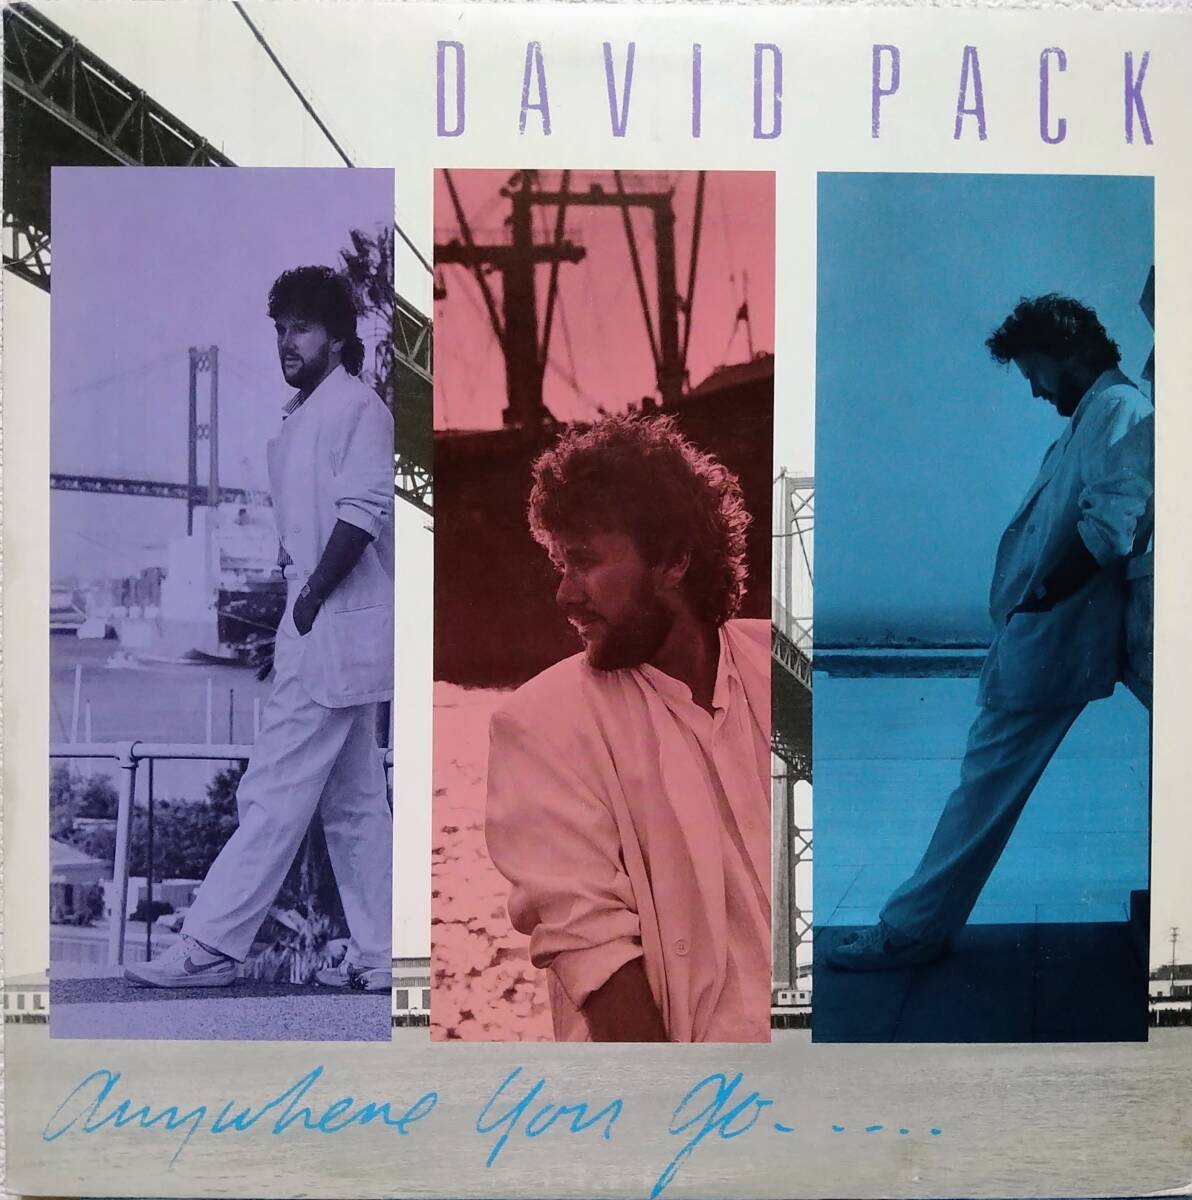 【LP AOR】David Pack「Anywhere You Go....」Promo JPN盤 白プロモ I Just Can't Let Go feat.James Ingram.Michael McDonald 他 収録！_ジャケット